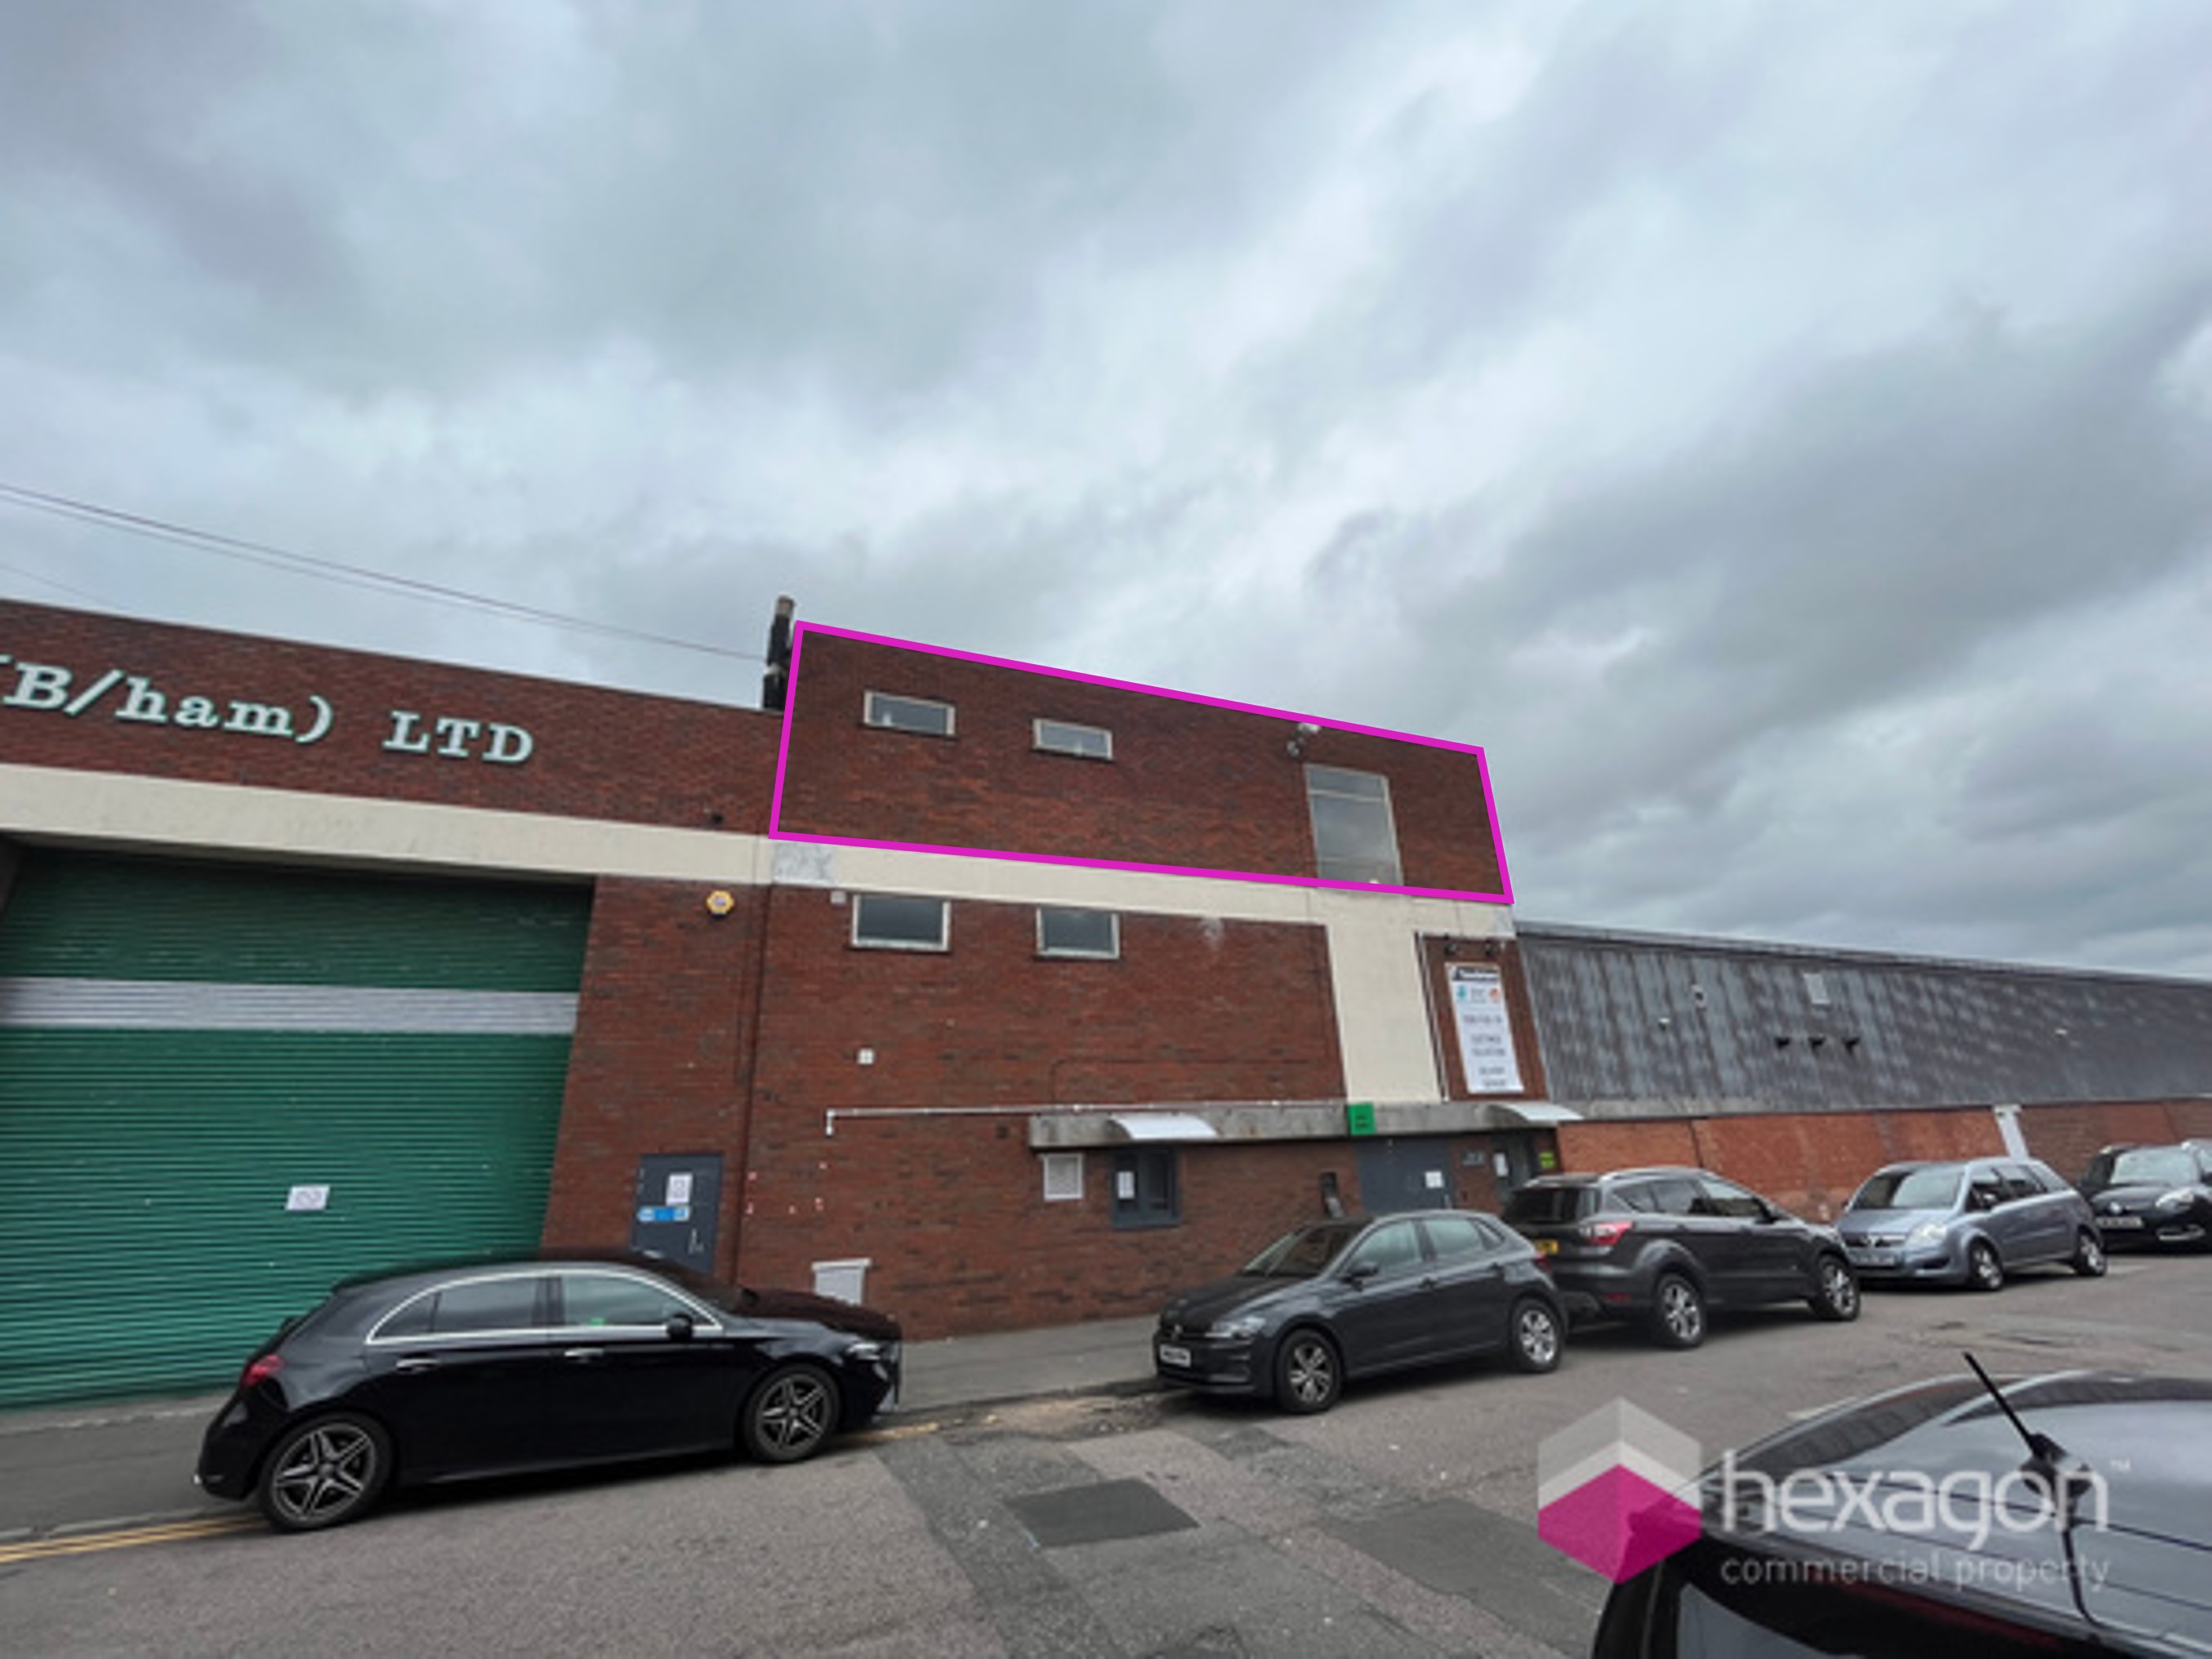 Office for rent in Birmingham. From Hexagon Commercial Property